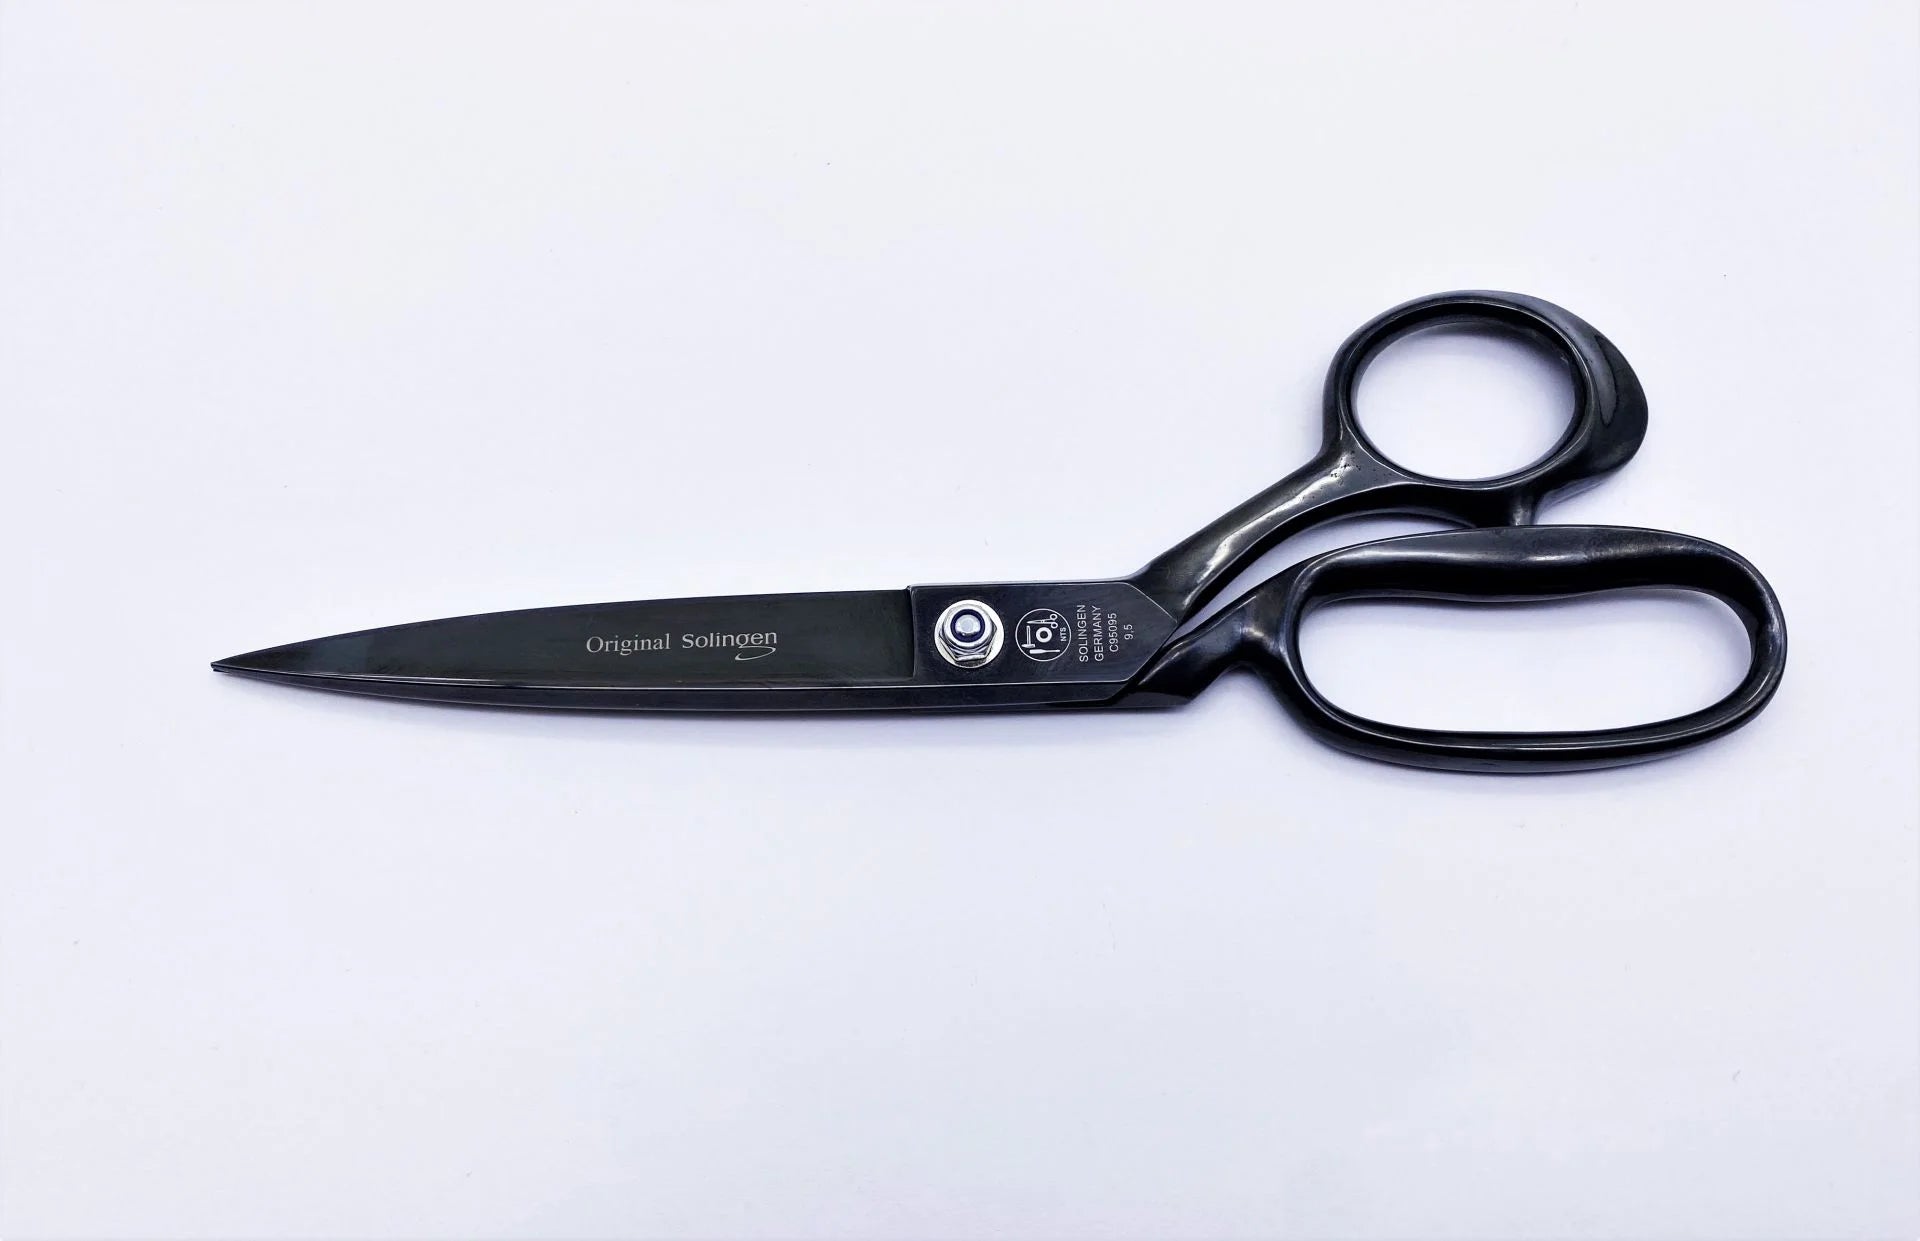 Black Edition Tailor's Shears Textile Scissors Fabric Shears Industrial Scissors, approx. 24 cm 9.5" inch